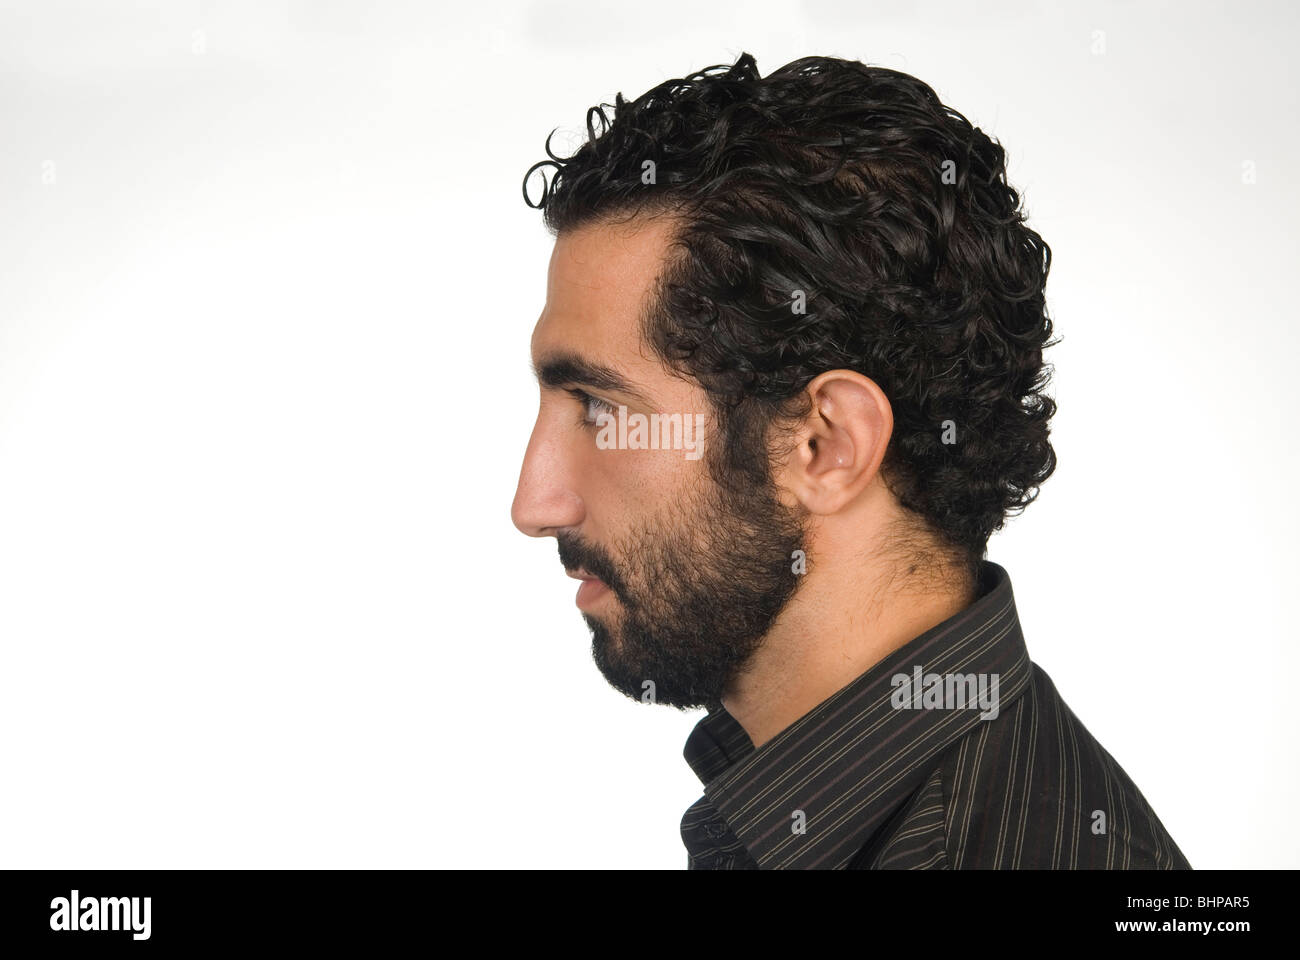 profile portrait of a 25 years old middle eastern man stock